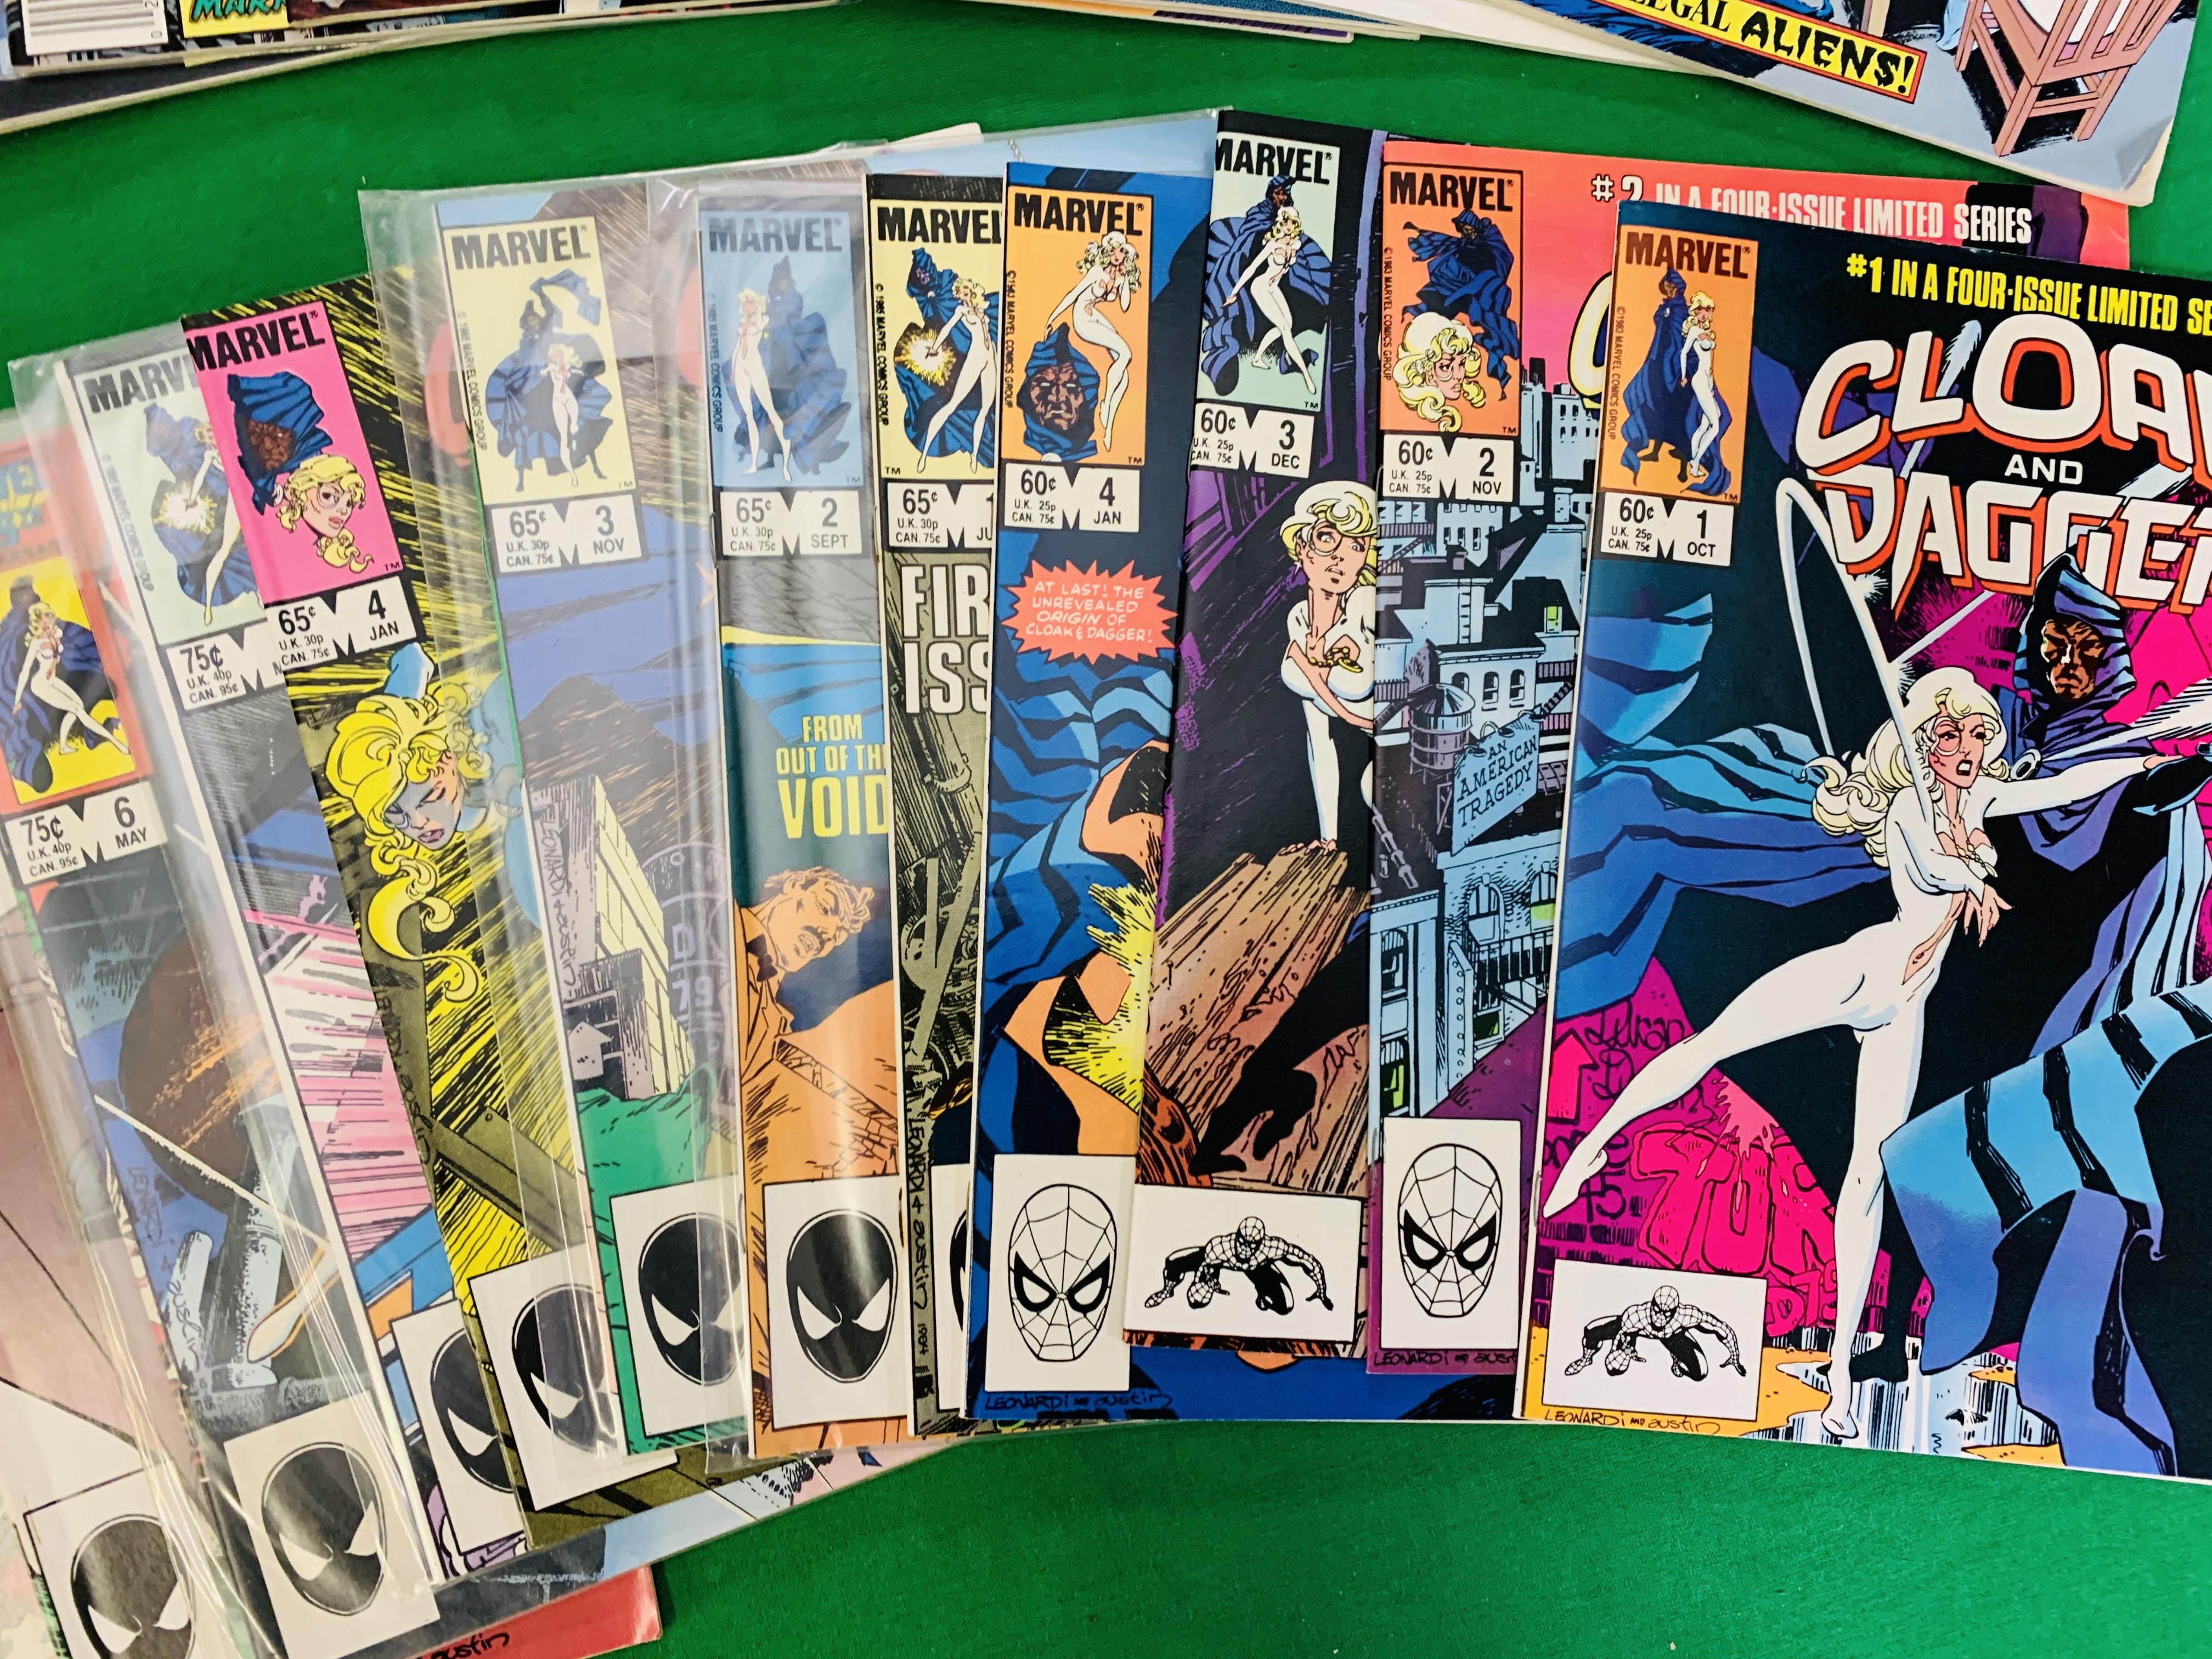 MARVEL COMICS CLOAK AND DAGGER NO. 1 - 4 FROM 1983, NO. 1 - 11 FROM 1985, NO. 1 - 19 FROM 1988. - Image 3 of 7